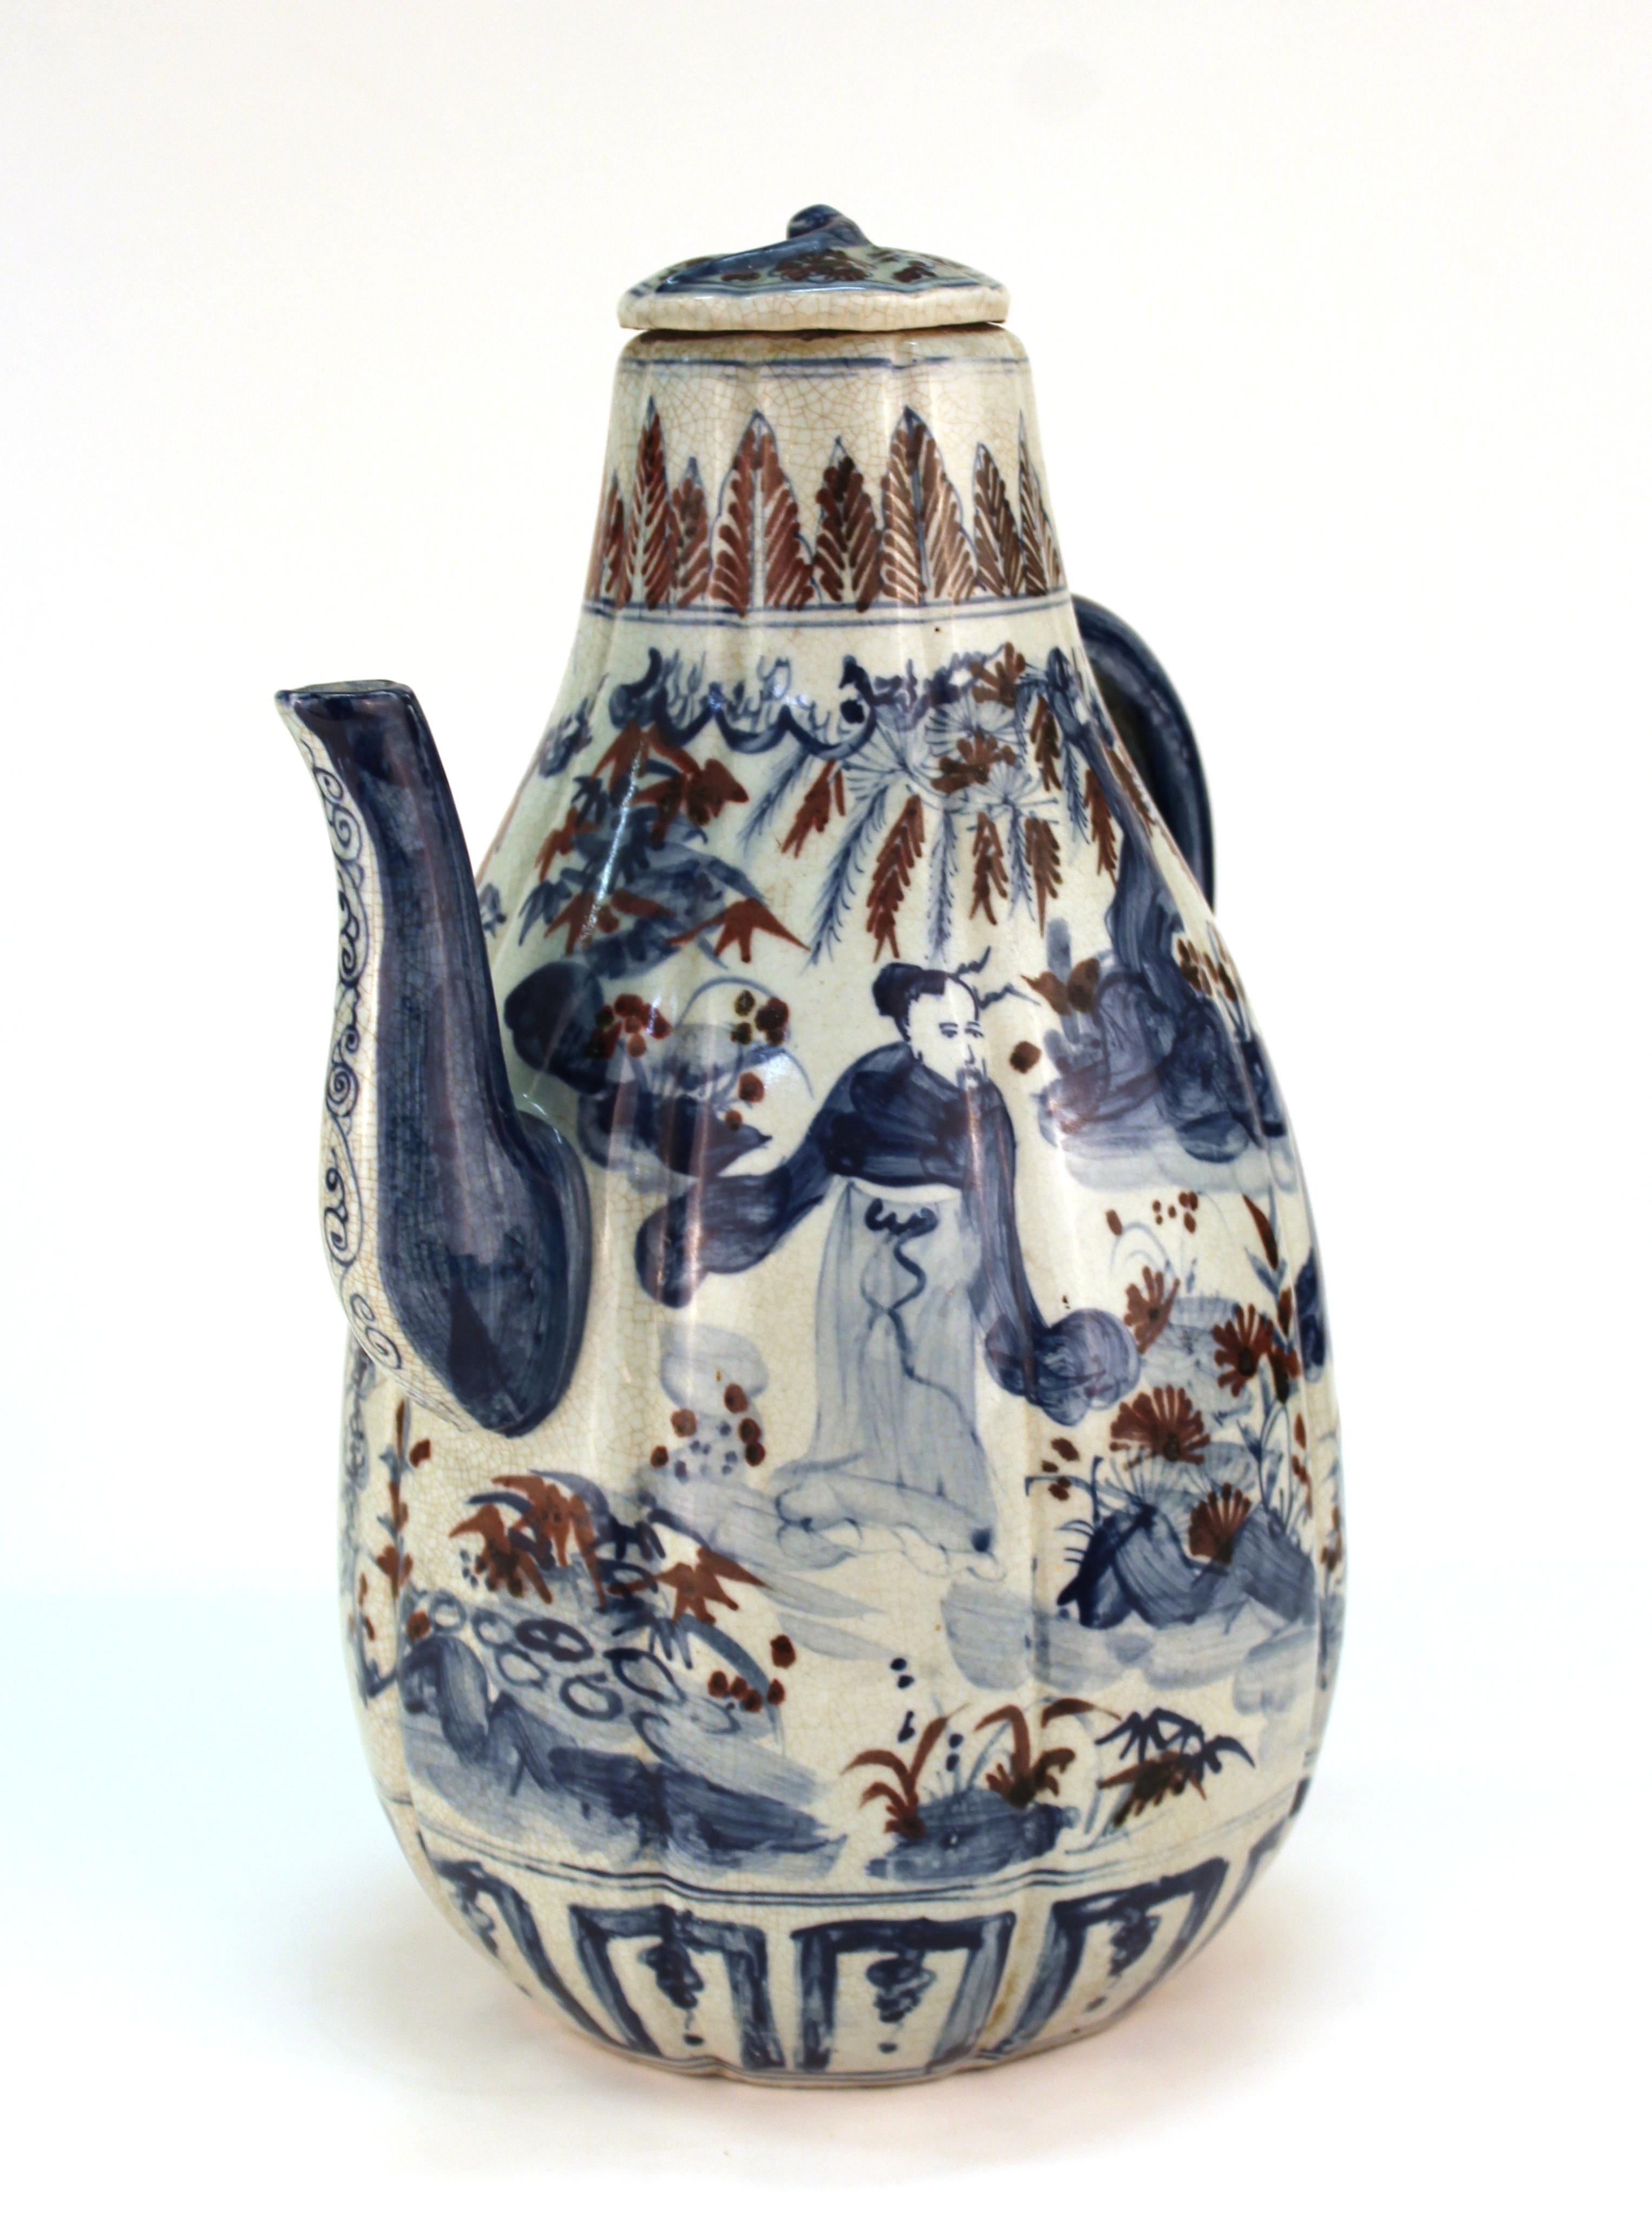 Chinese Yuan Dynasty style marked large under-glazed blue and iron oxide red porcelain lidded wine ewer with ribbed sides in an elaborate all-over design of scholars in a garden setting between borders of stiff fans and feathers. A character